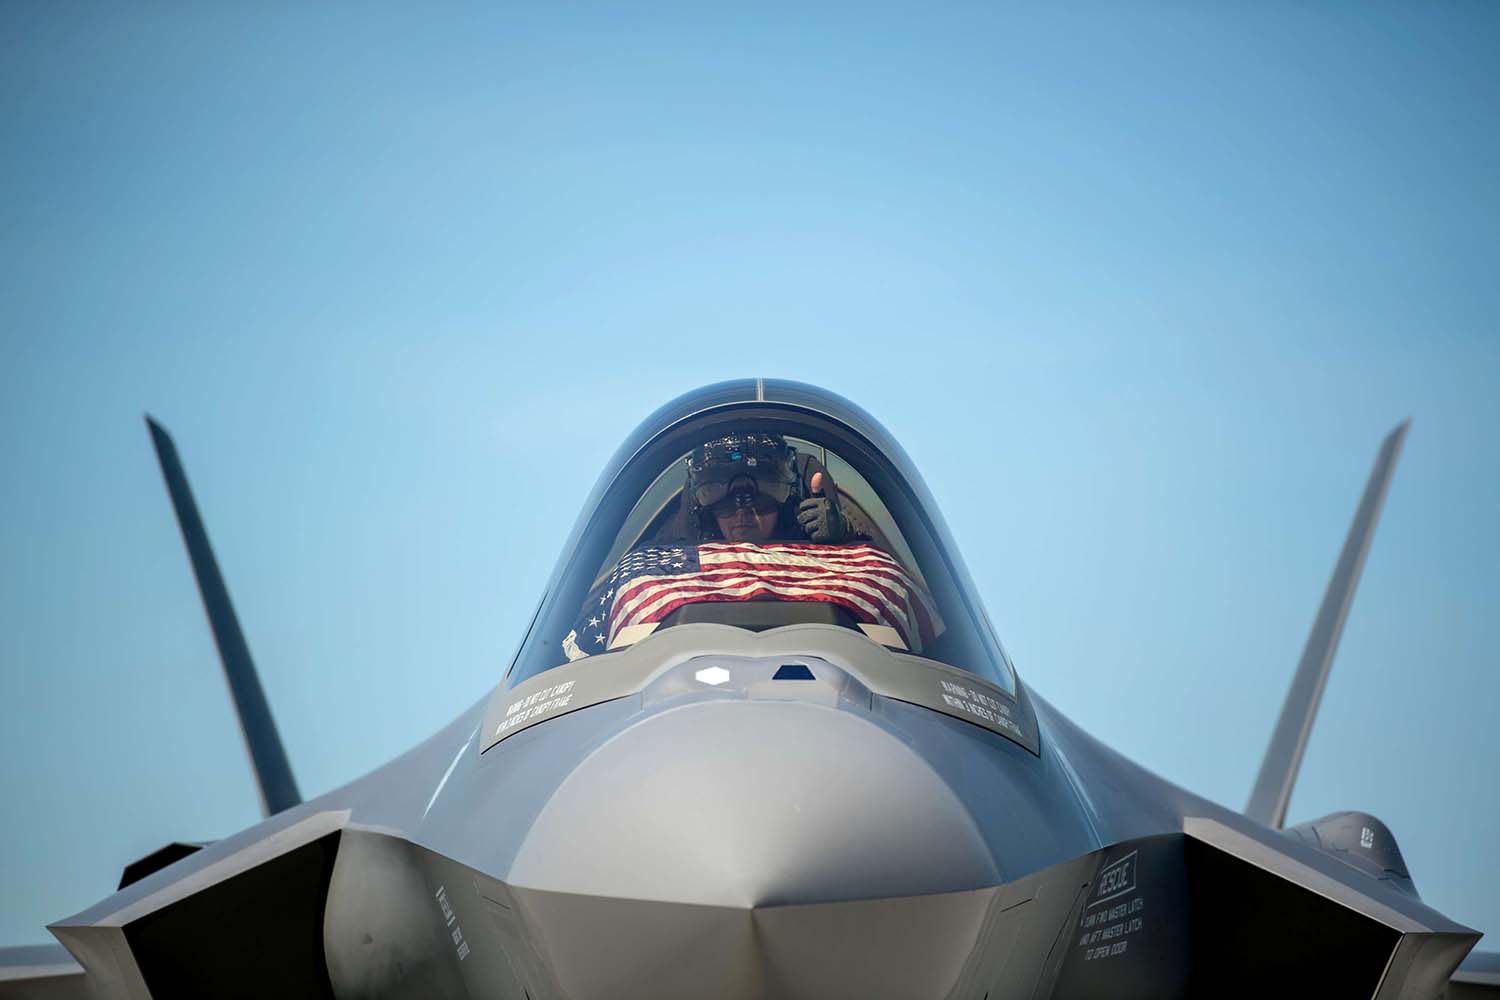 Turkey can’t have both American F-35s and Russian S-400s